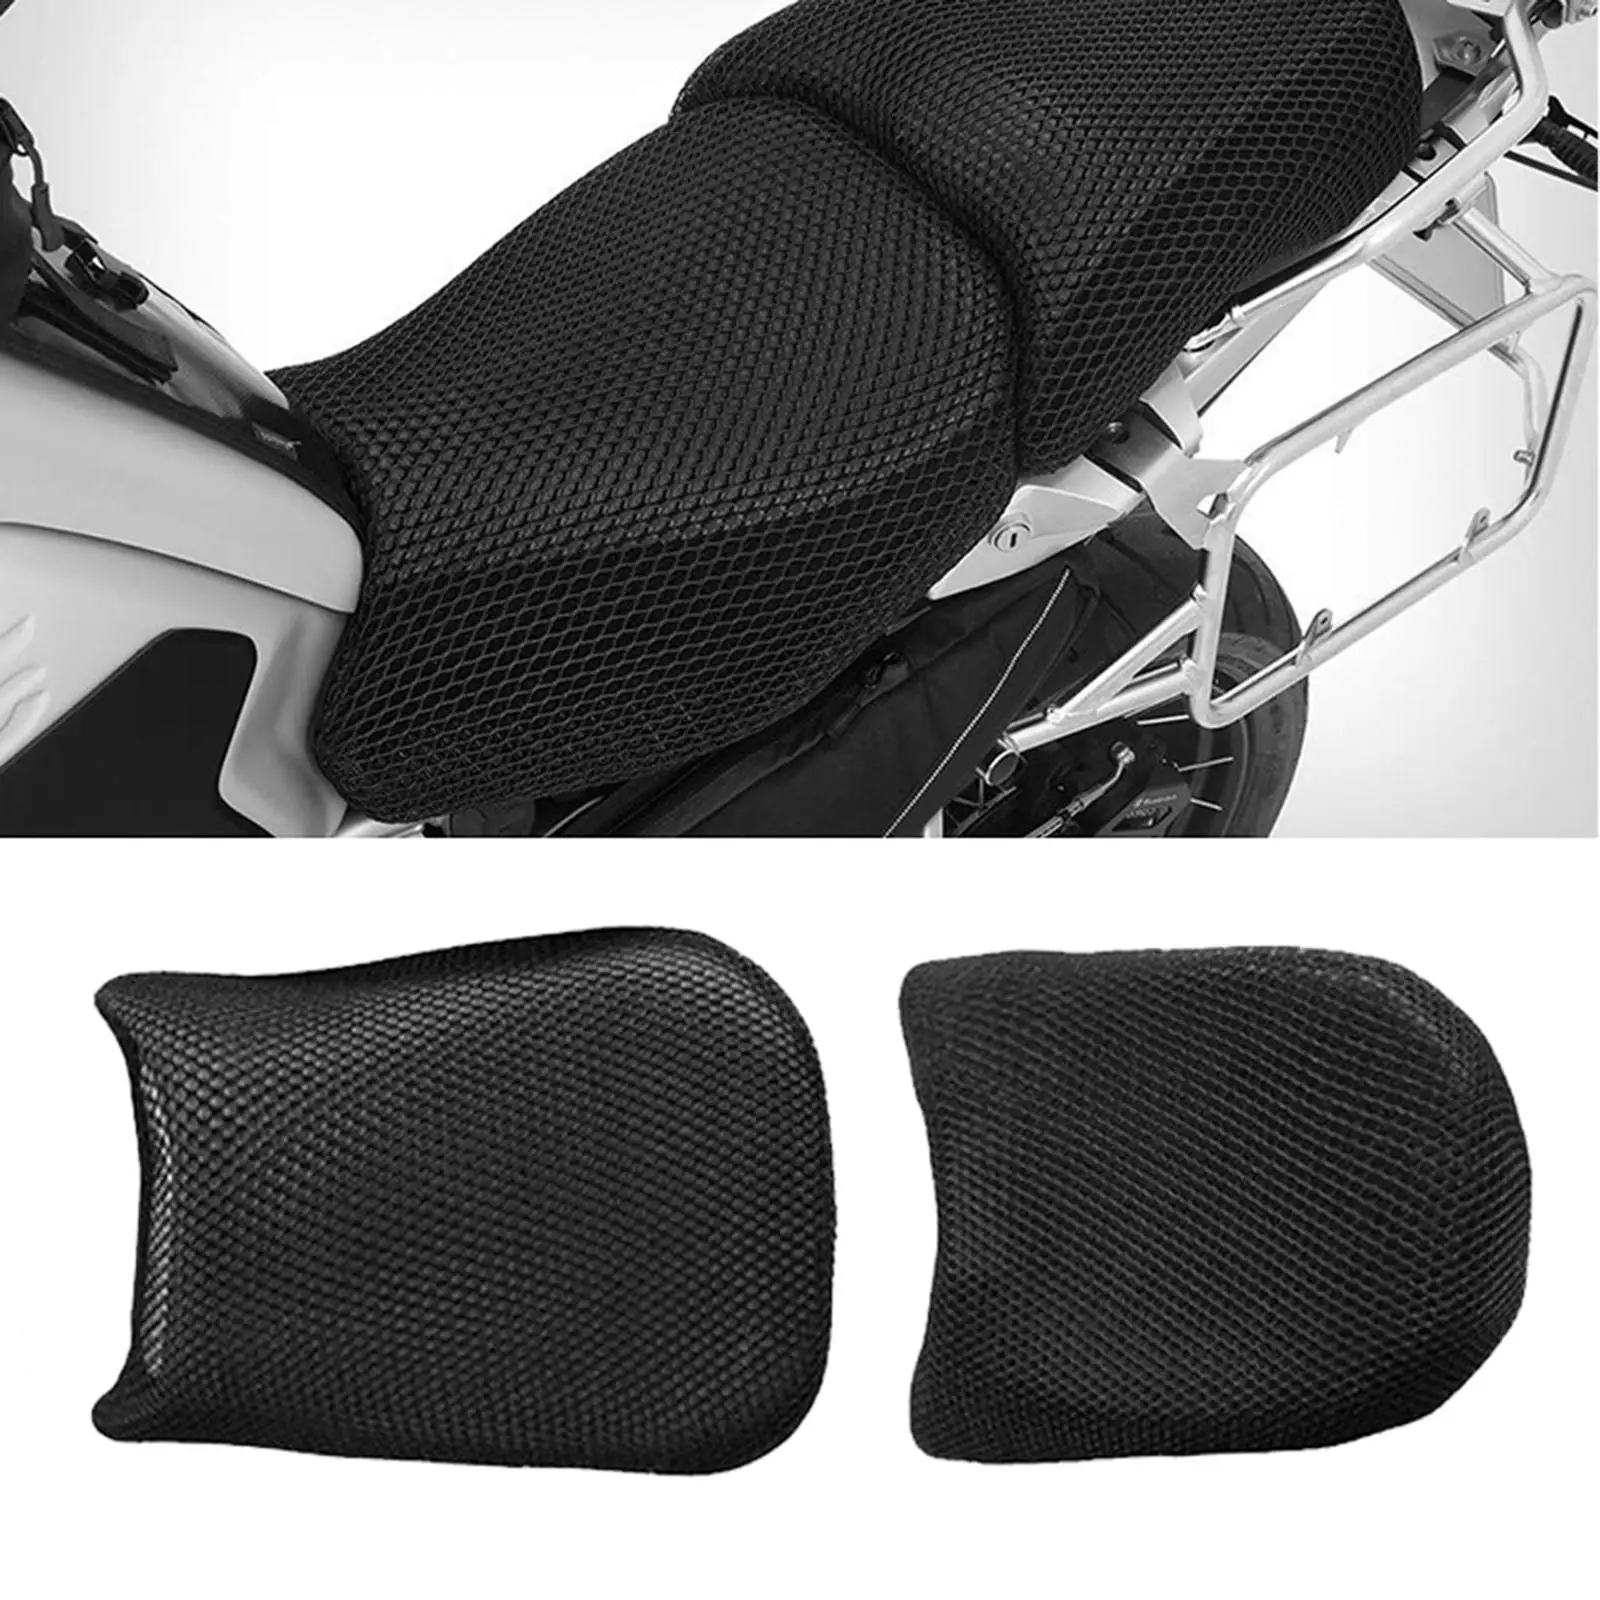 Saddle Seat Cover Protecting Cover Accessories Protection for R1200GS